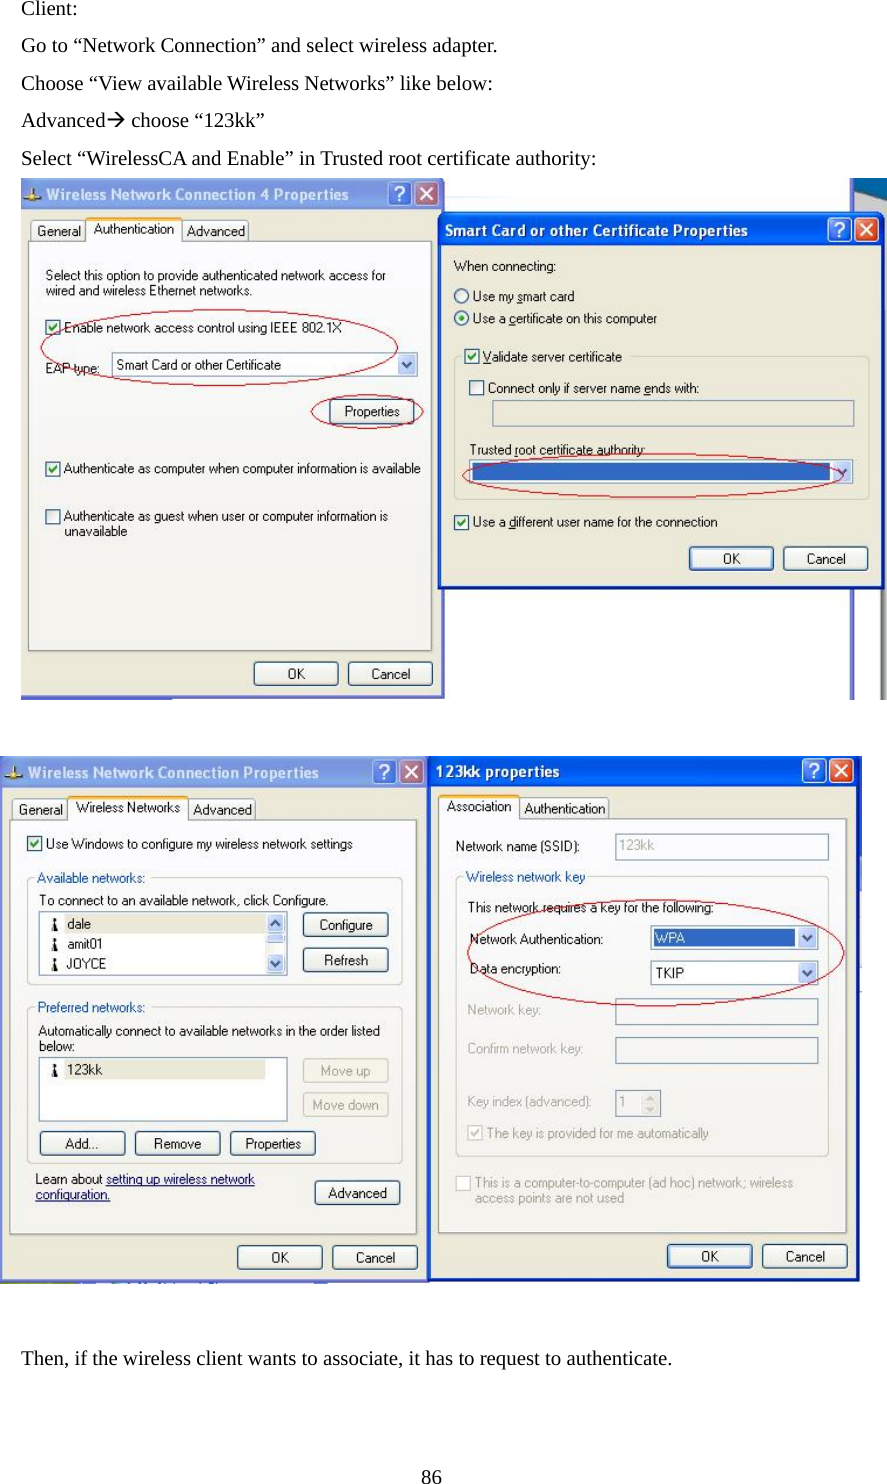 Client: Go to “Network Connection” and select wireless adapter. Choose “View available Wireless Networks” like below: AdvancedÆ choose “123kk” Select “WirelessCA and Enable” in Trusted root certificate authority:            Then, if the wireless client wants to associate, it has to request to authenticate.        86